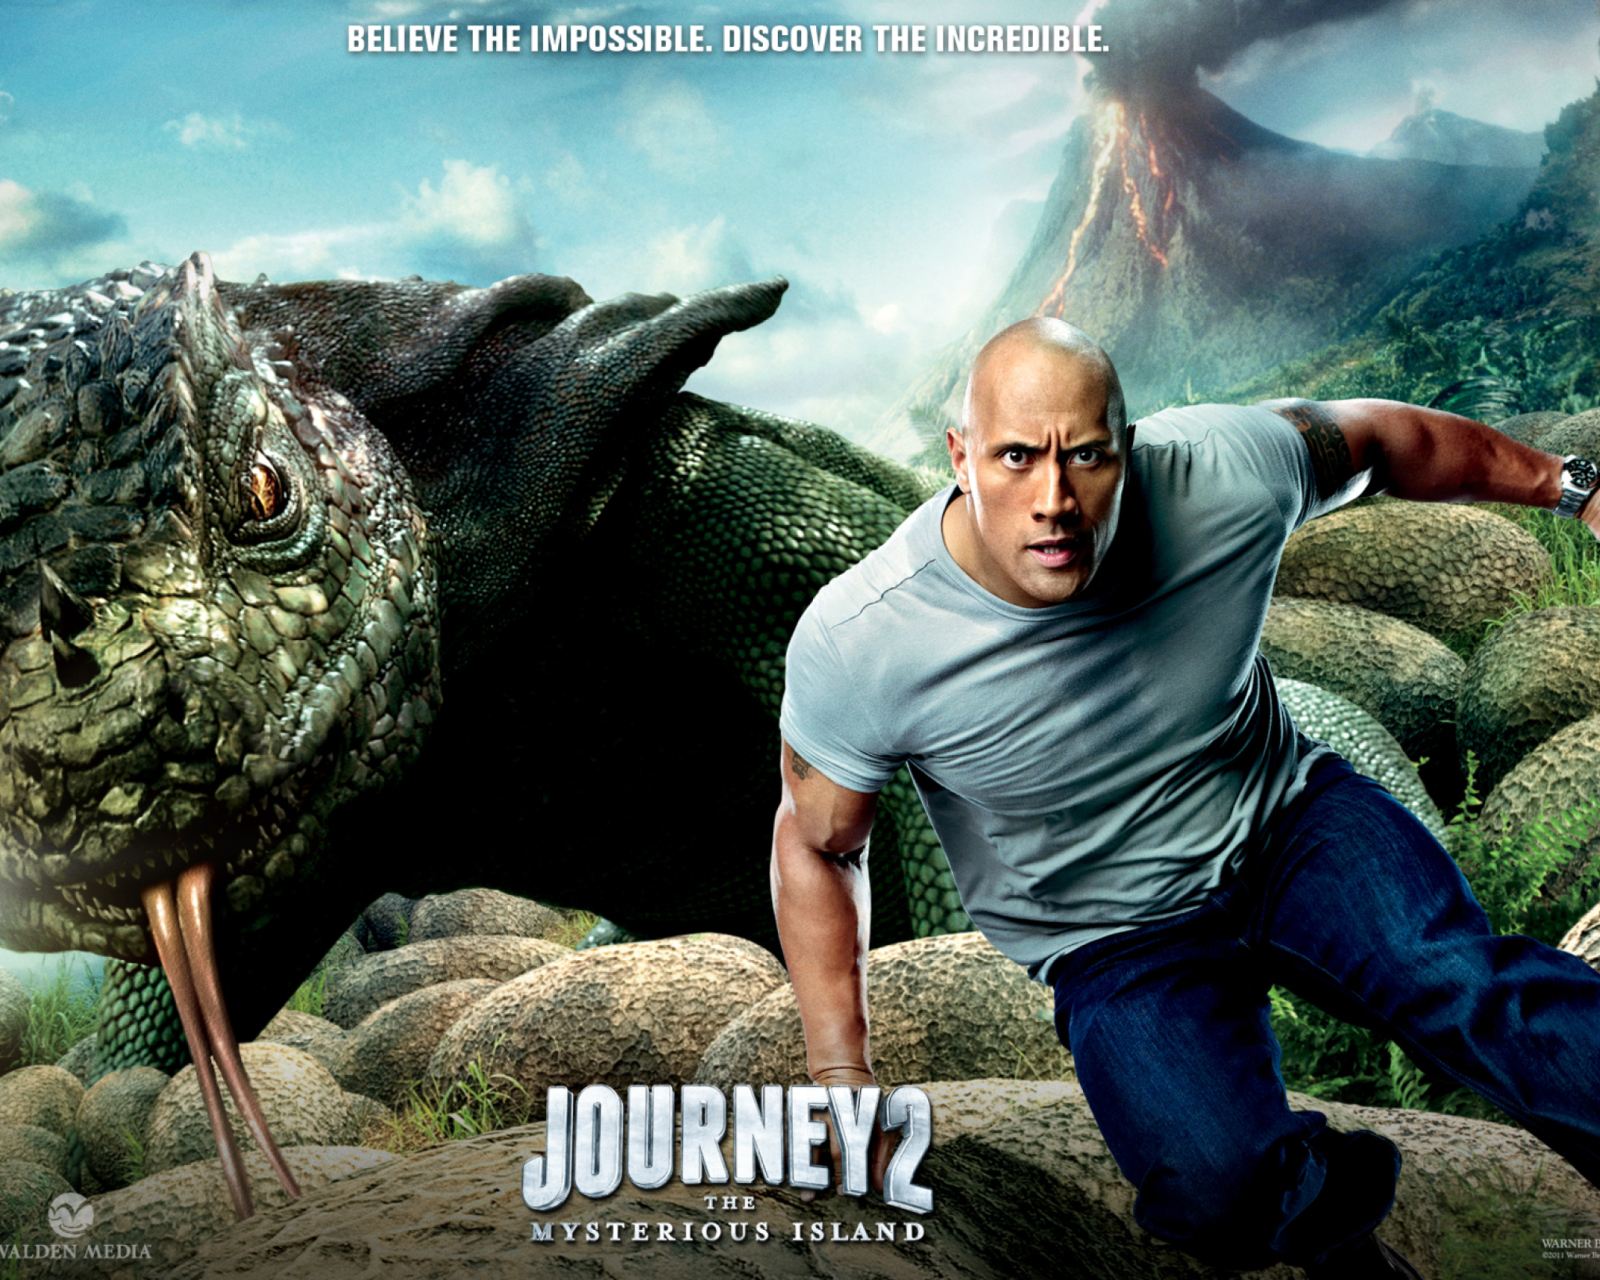 Dwayne Johnson In Journey 2: The Mysterious Island wallpaper 1600x1280